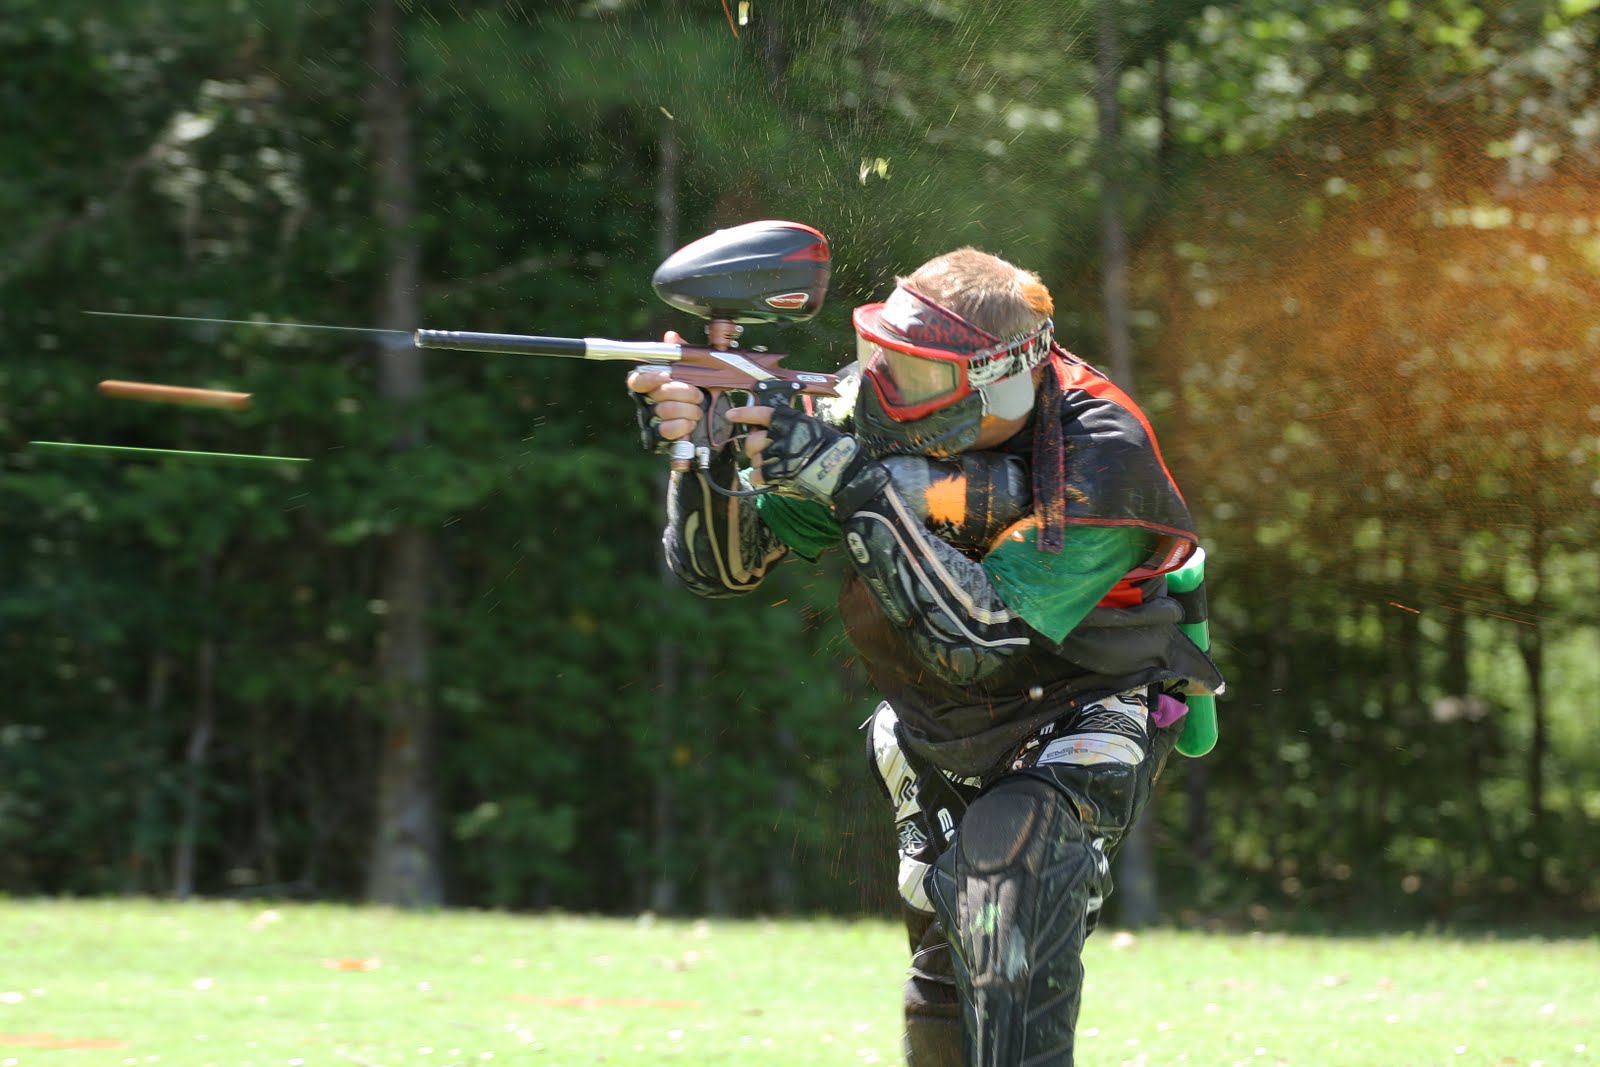 PRIME PAINTBALL: Shooting Day: Interview with A Paintball ...